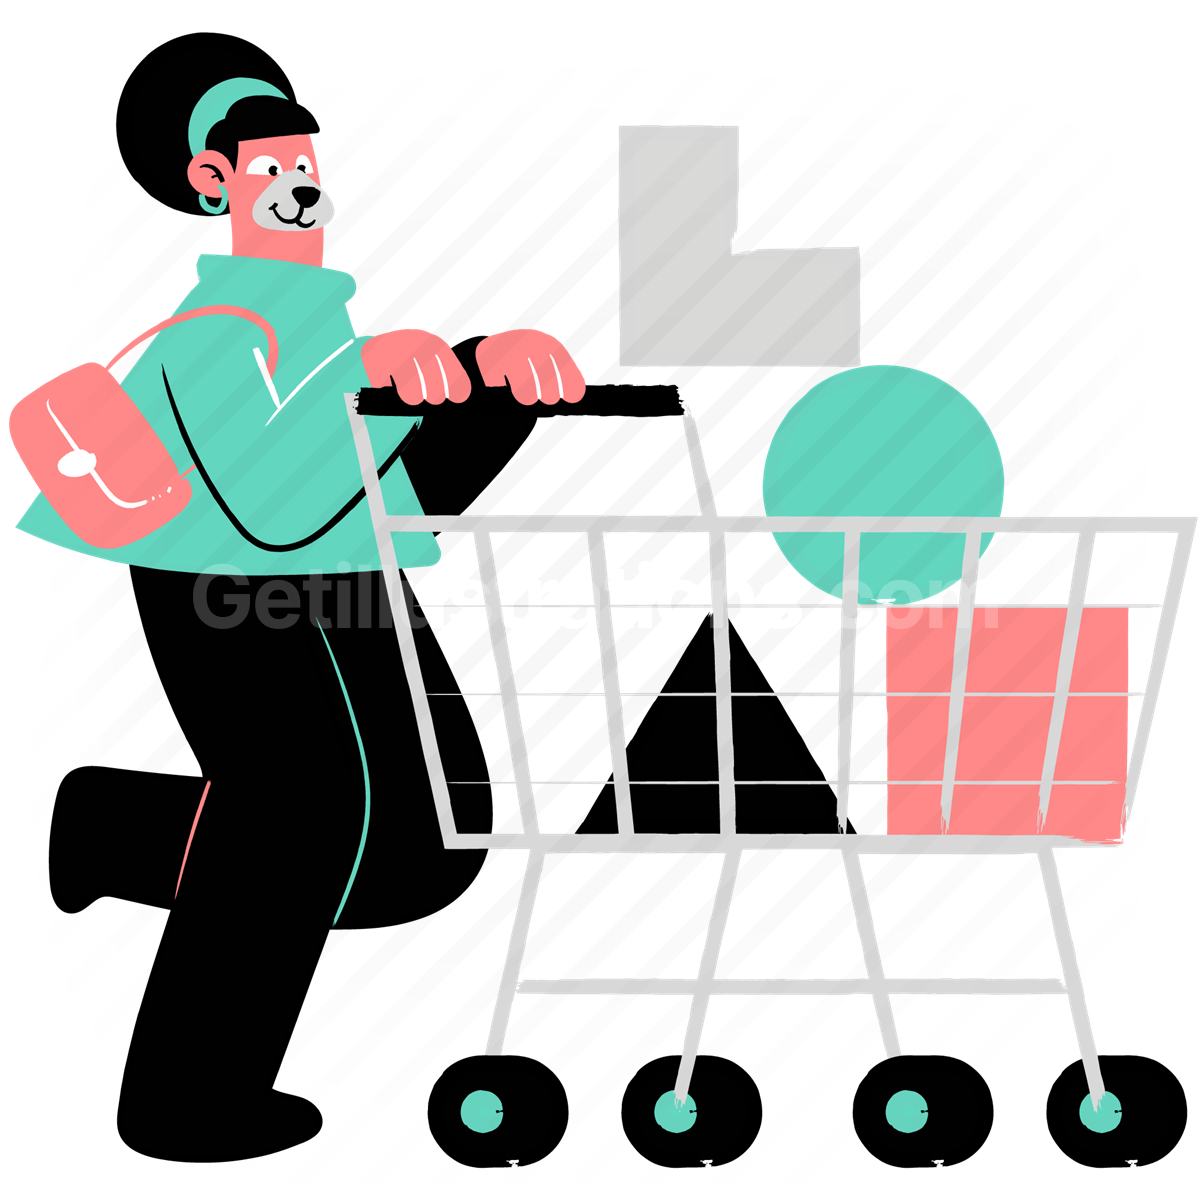 shop, cart, shapes, items, product, animal